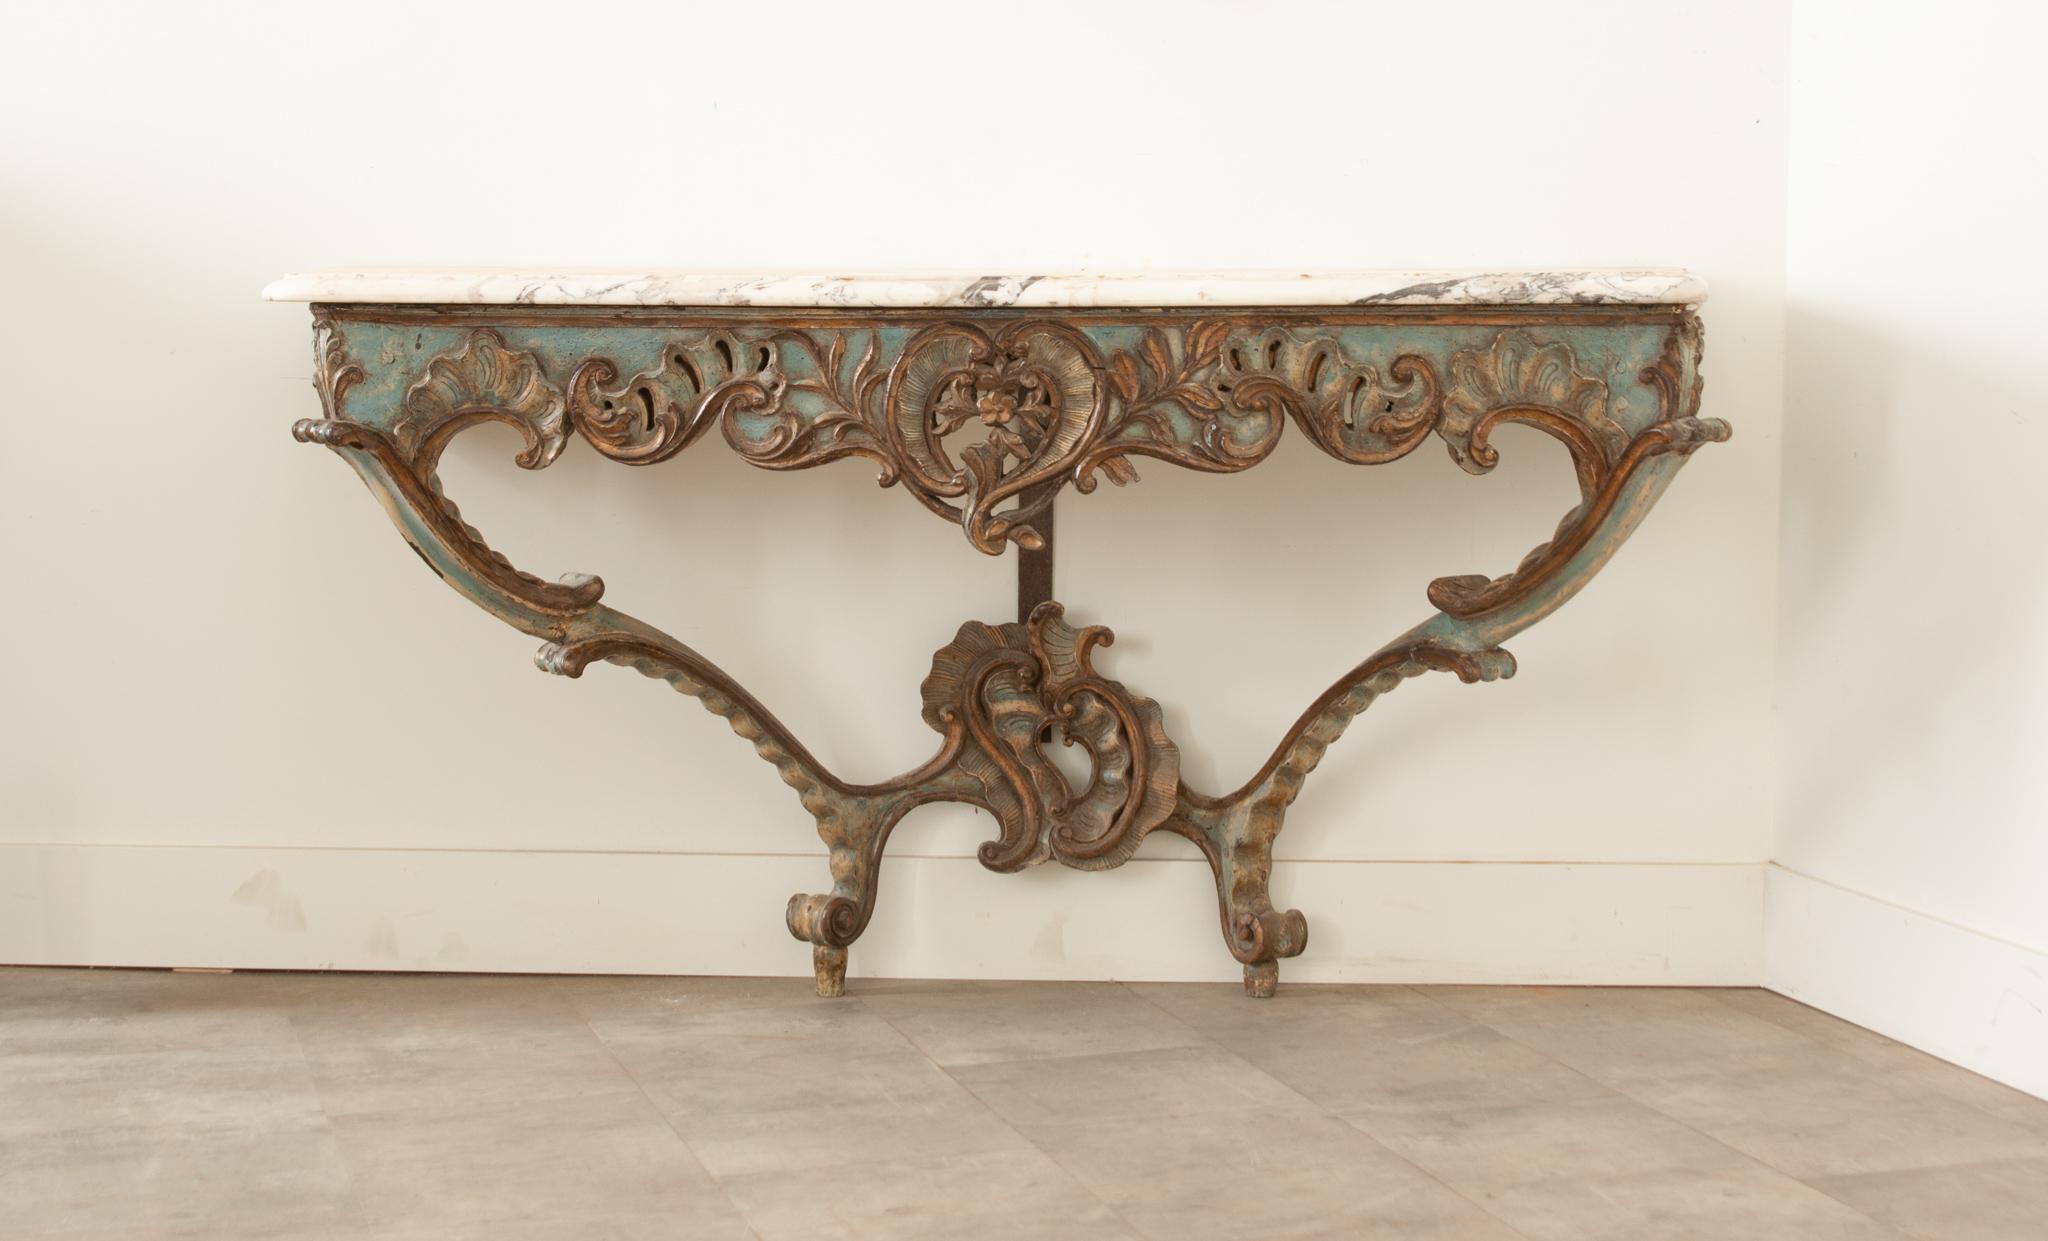 A gorgeous Rococo console table with original serpentine marble top over a pierced apron. Asymmetrical in design, featuring deeply carved C & S scrolls throughout. The table must be connected flat to the wall with added support from an iron bar. The